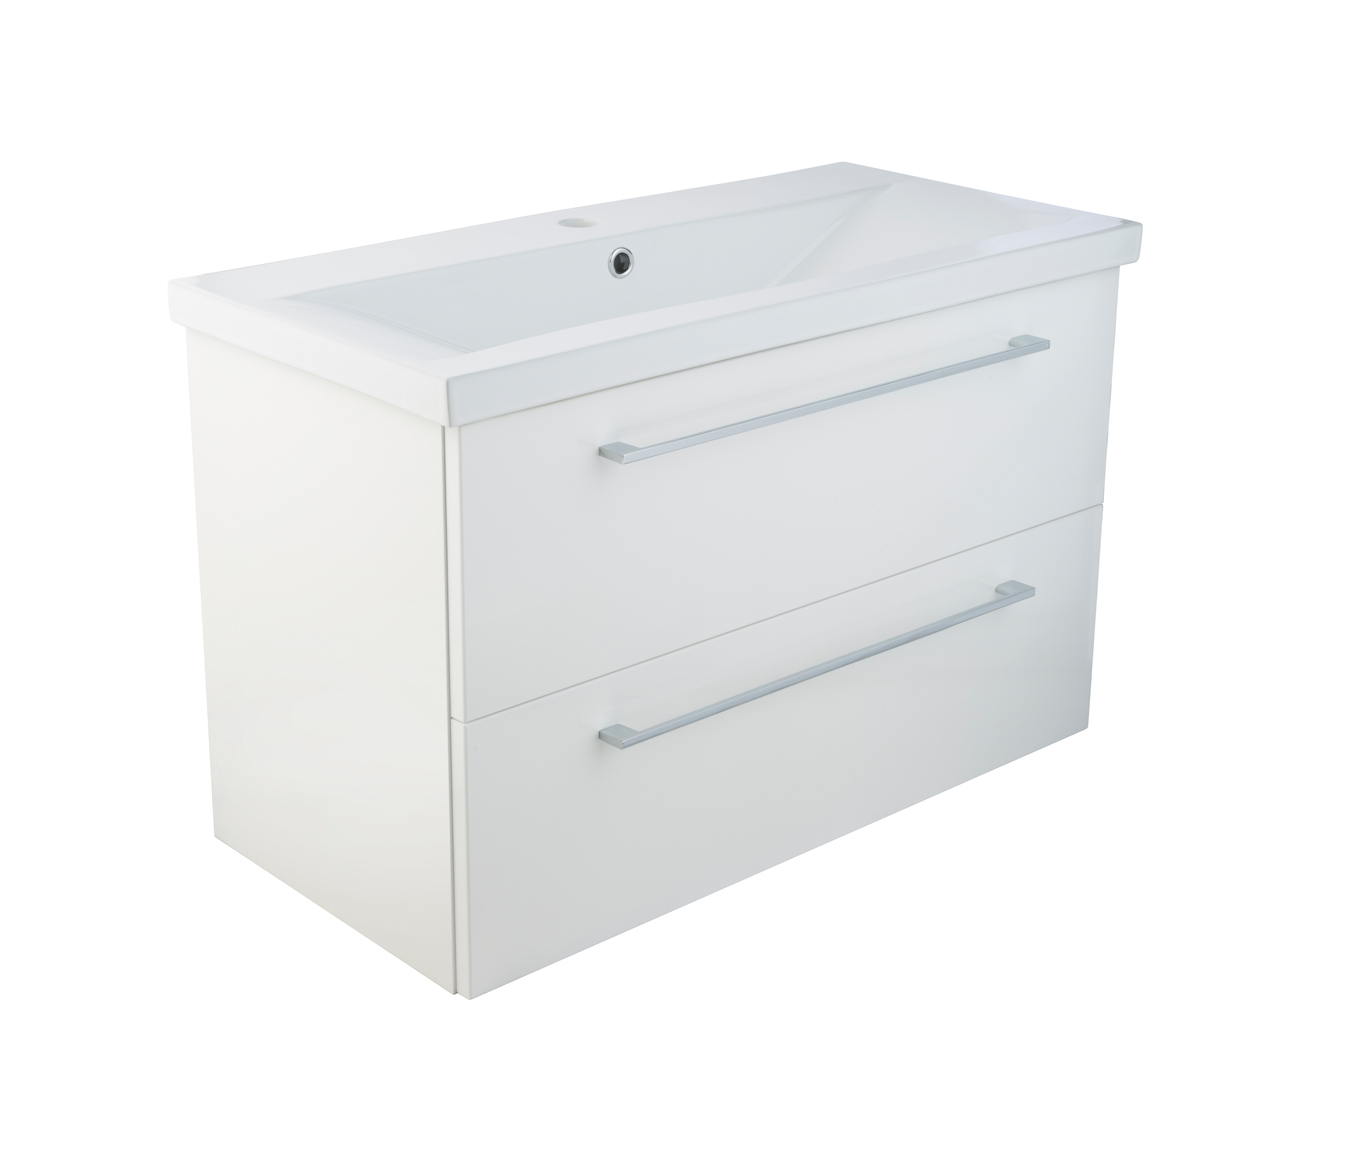 Pace 800 Wall Mounted Unit with Drawers and Basin - White - Just Taps